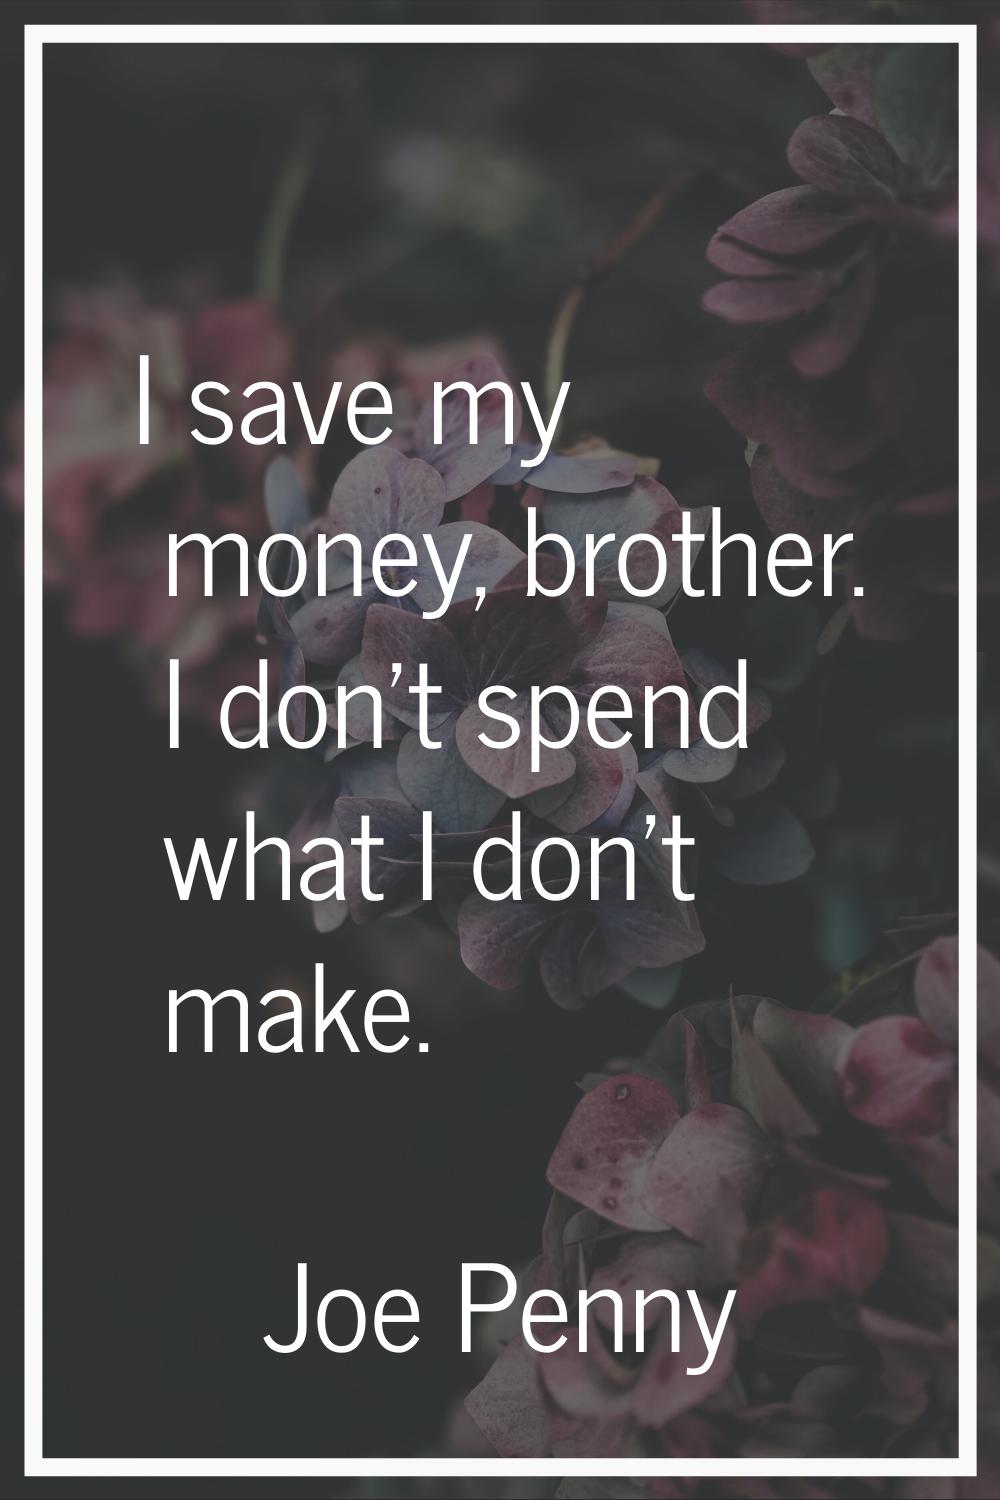 I save my money, brother. I don't spend what I don't make.